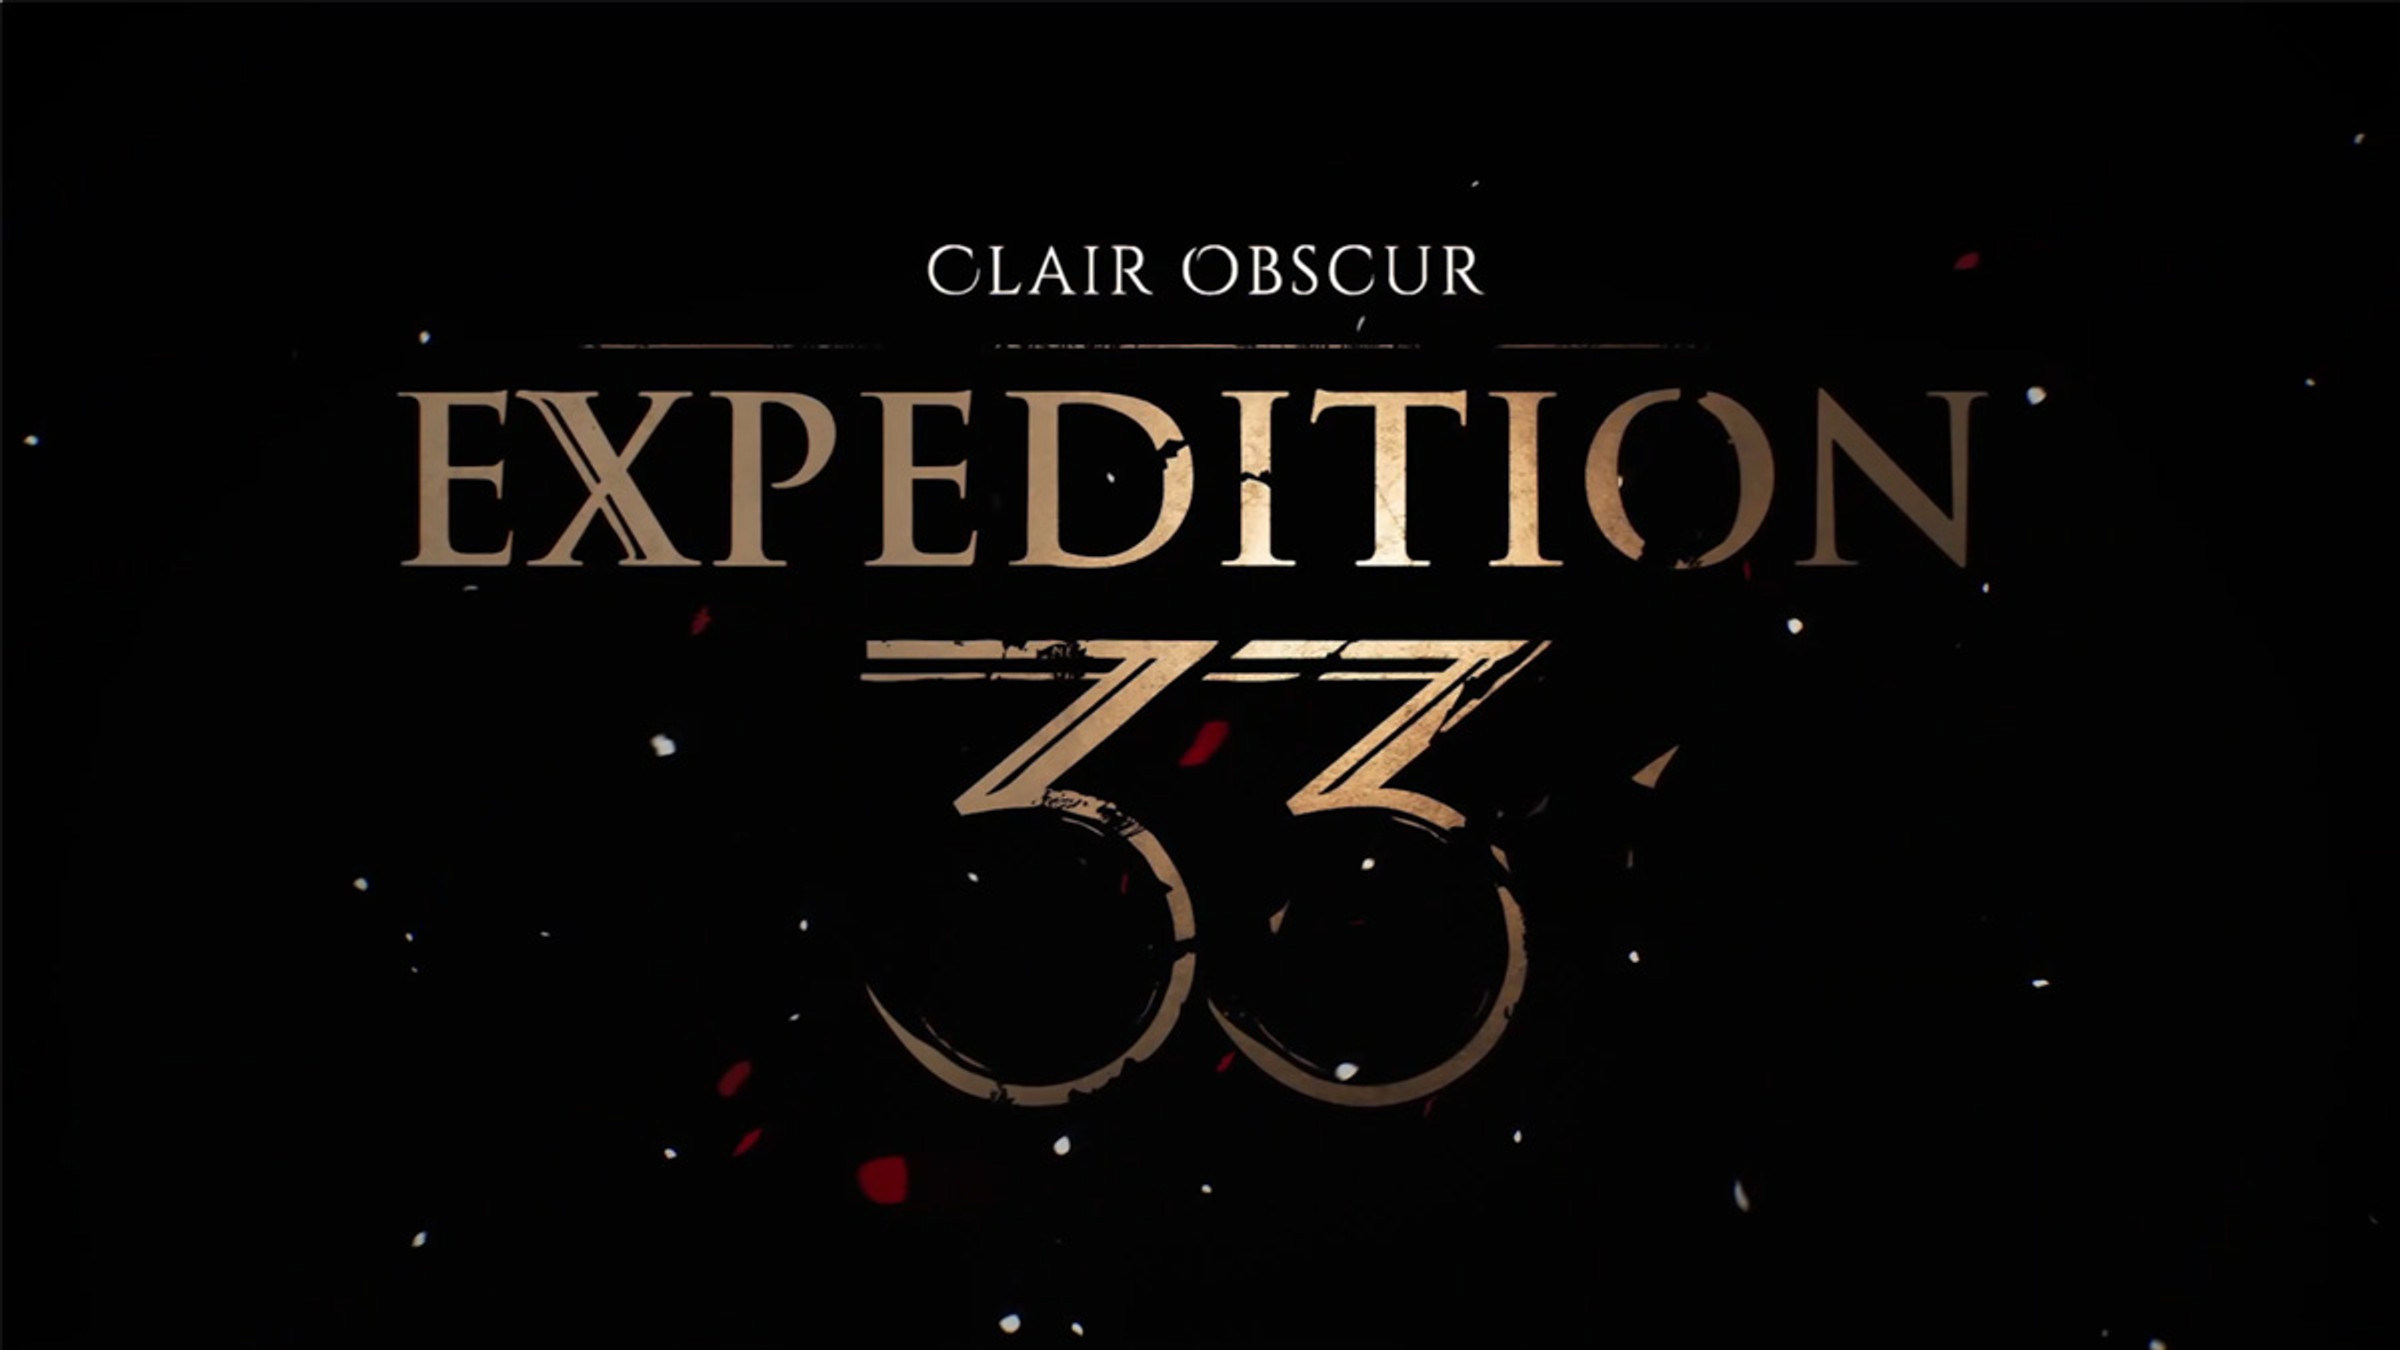 clair-obscur-expedition-33-trailer